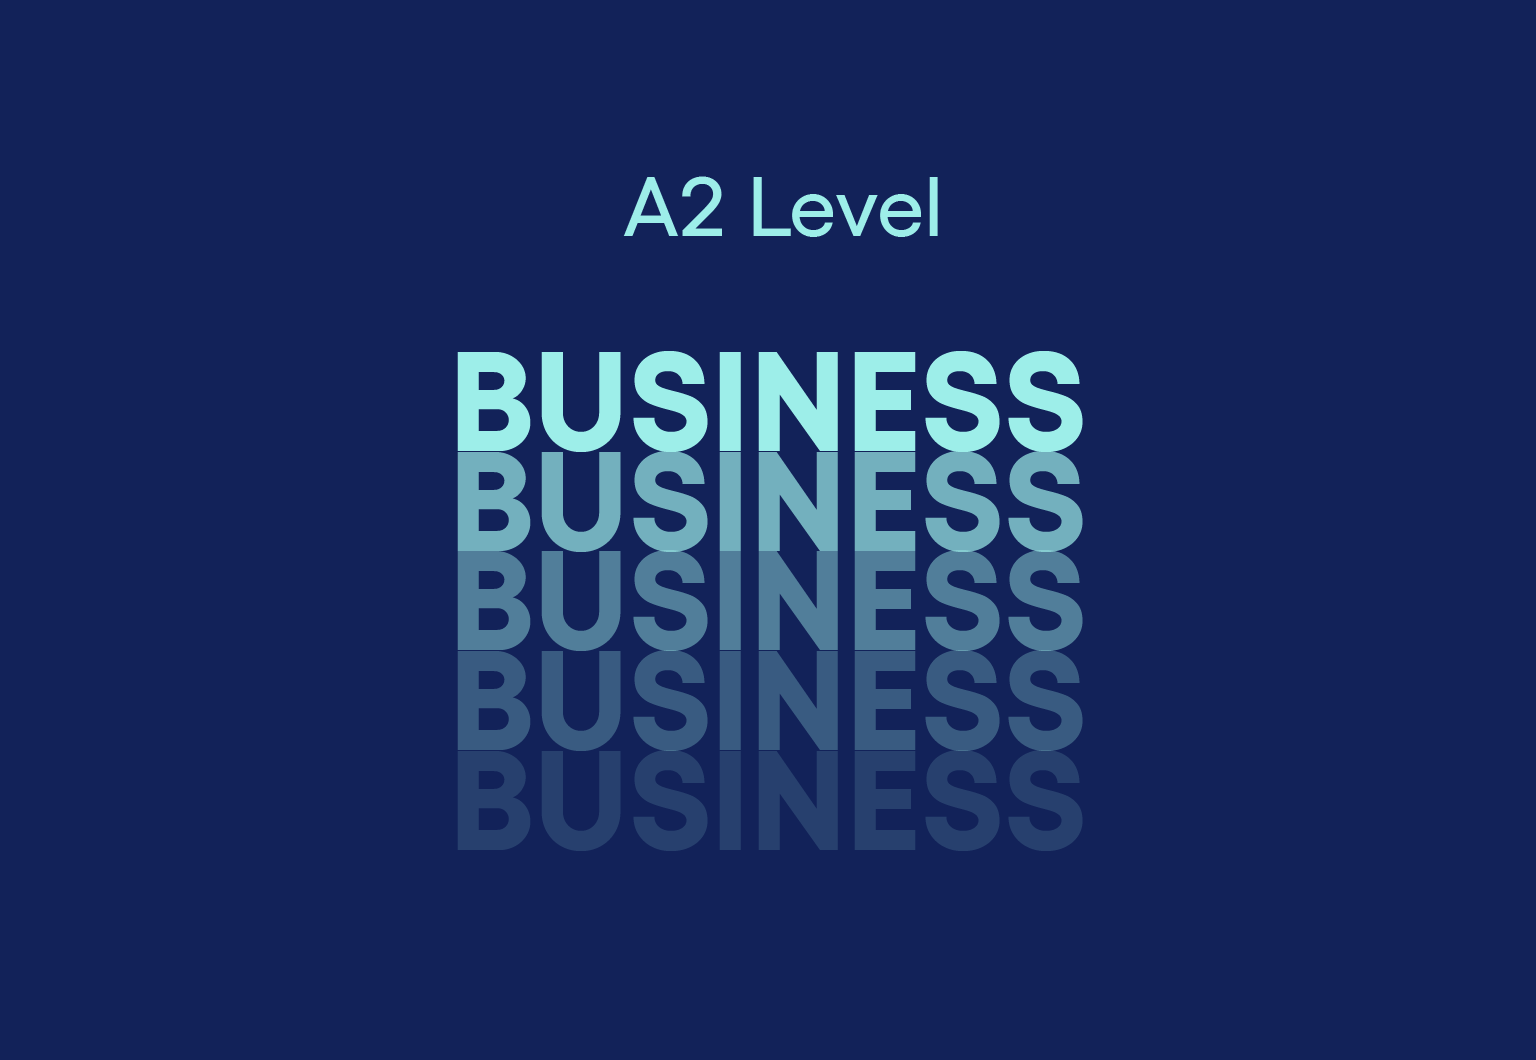 A2 Level Business